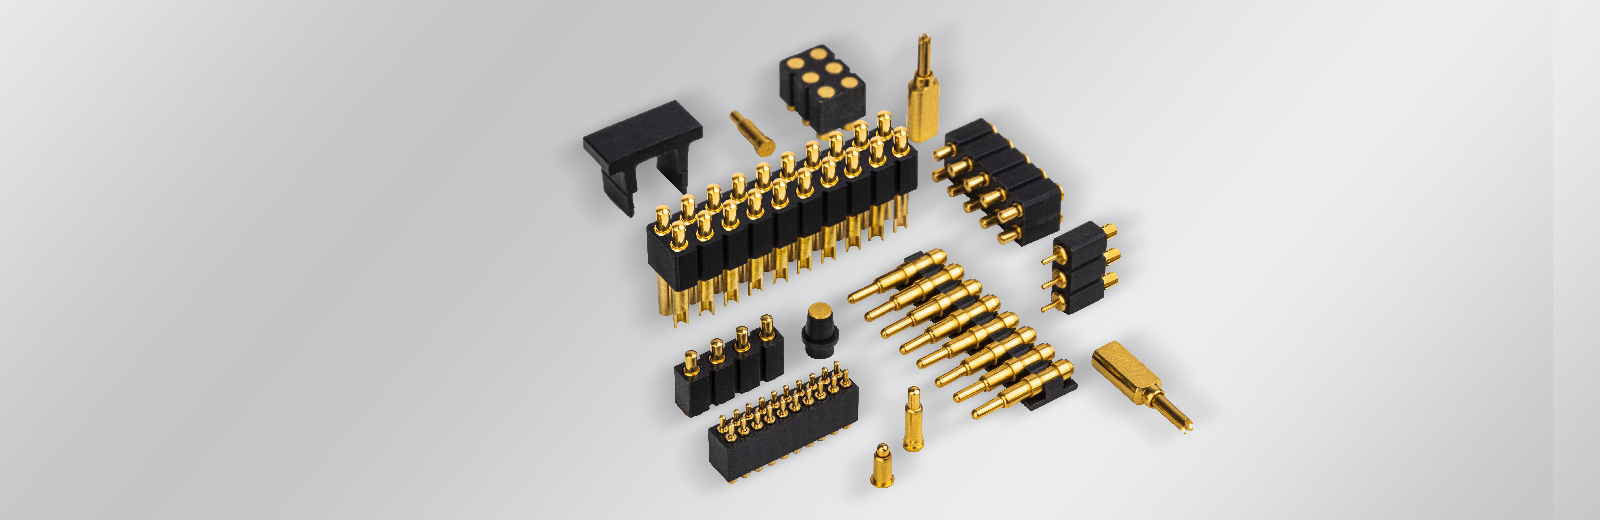 Test Probes as PCB Components